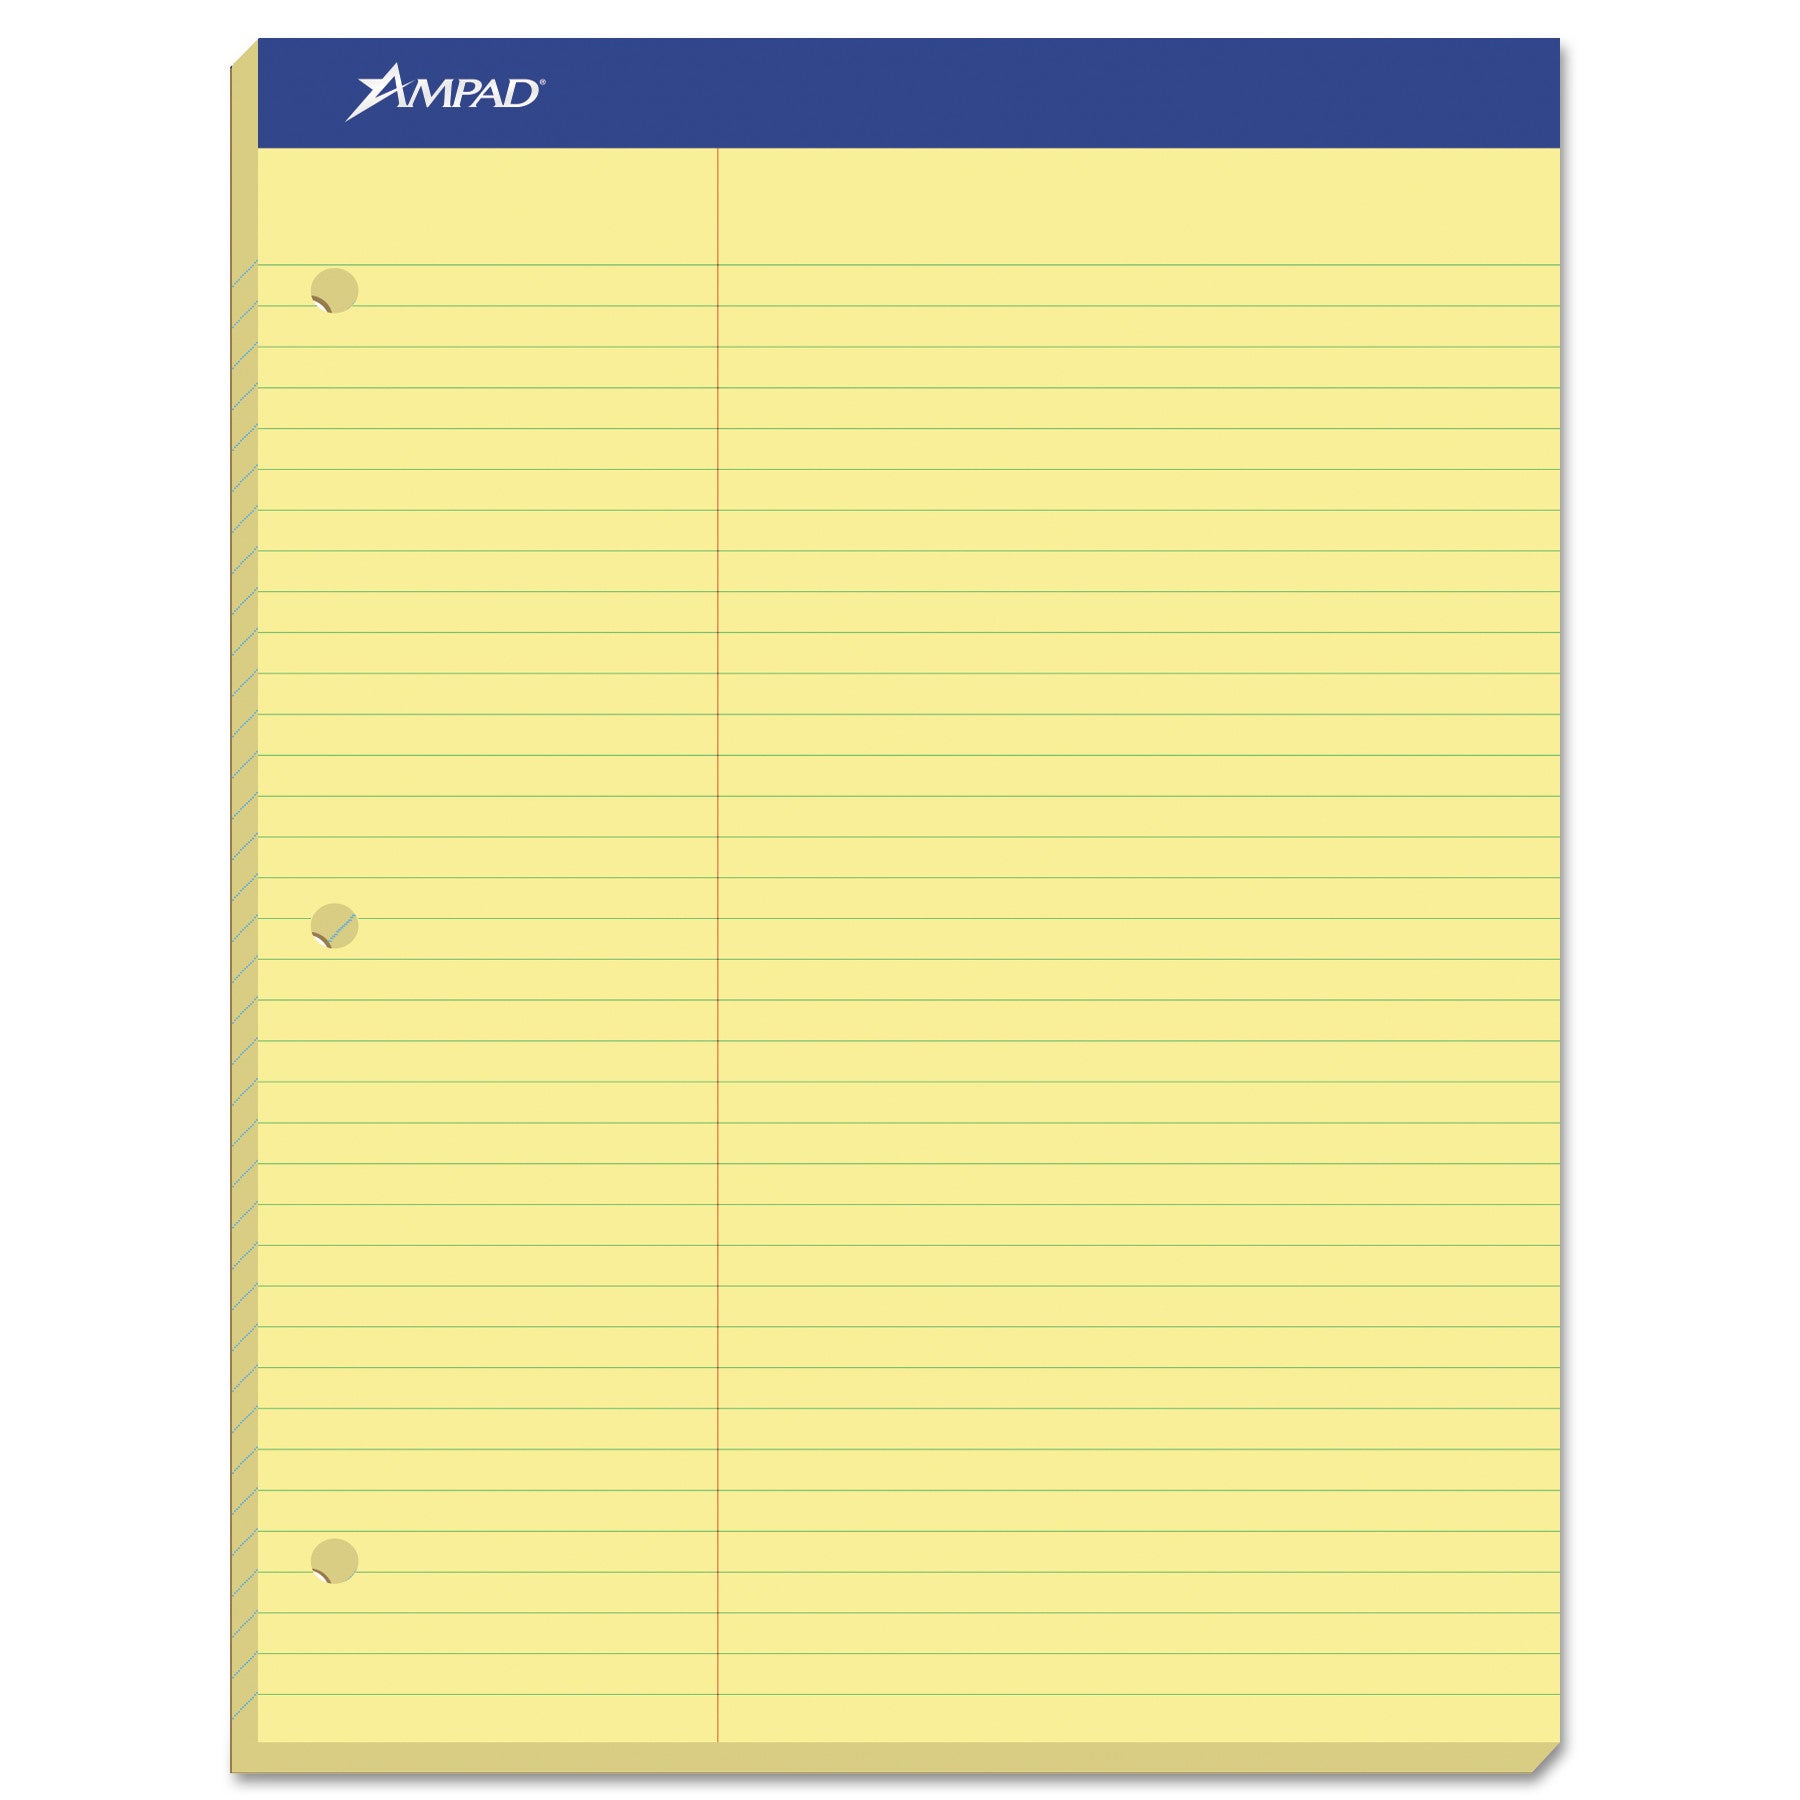 Double Sheet Pads, Pitman Rule Variation (Offset Dividing Line - 3" Left), 100 Canary-Yellow 8.5 x 11.75 Sheets - 